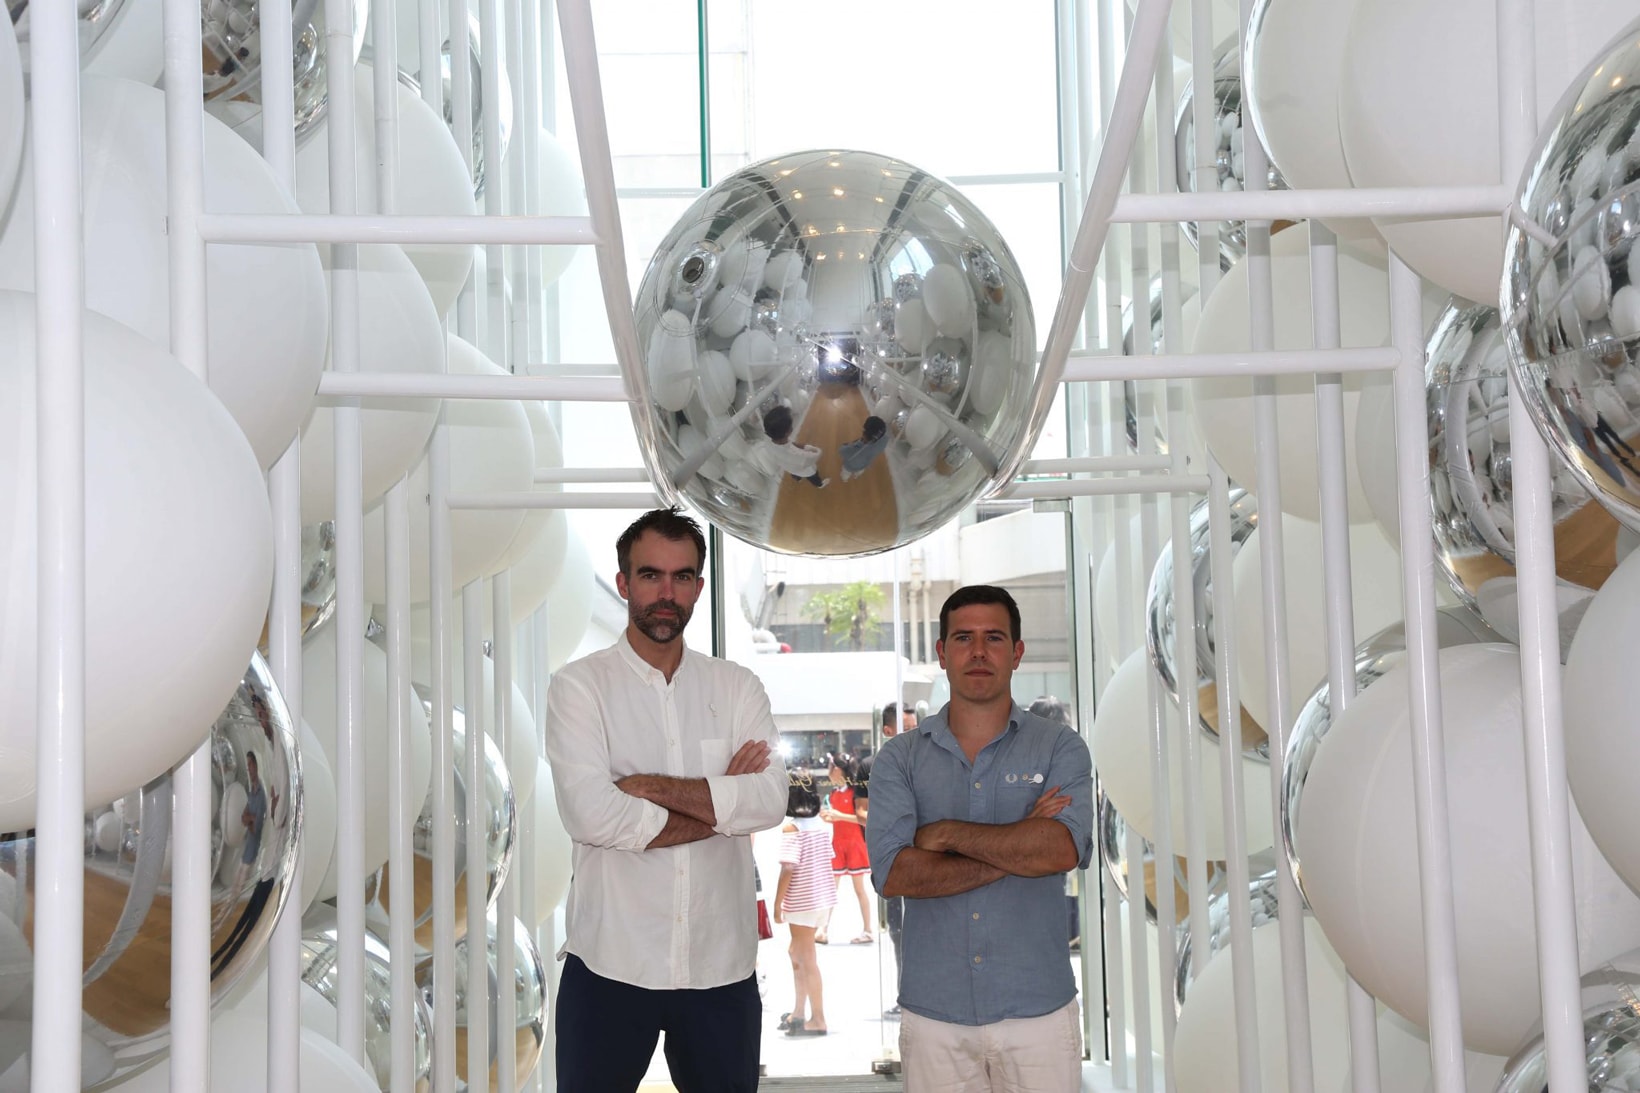 Nouvelle Installation Snarkitecture "BOUNCE"